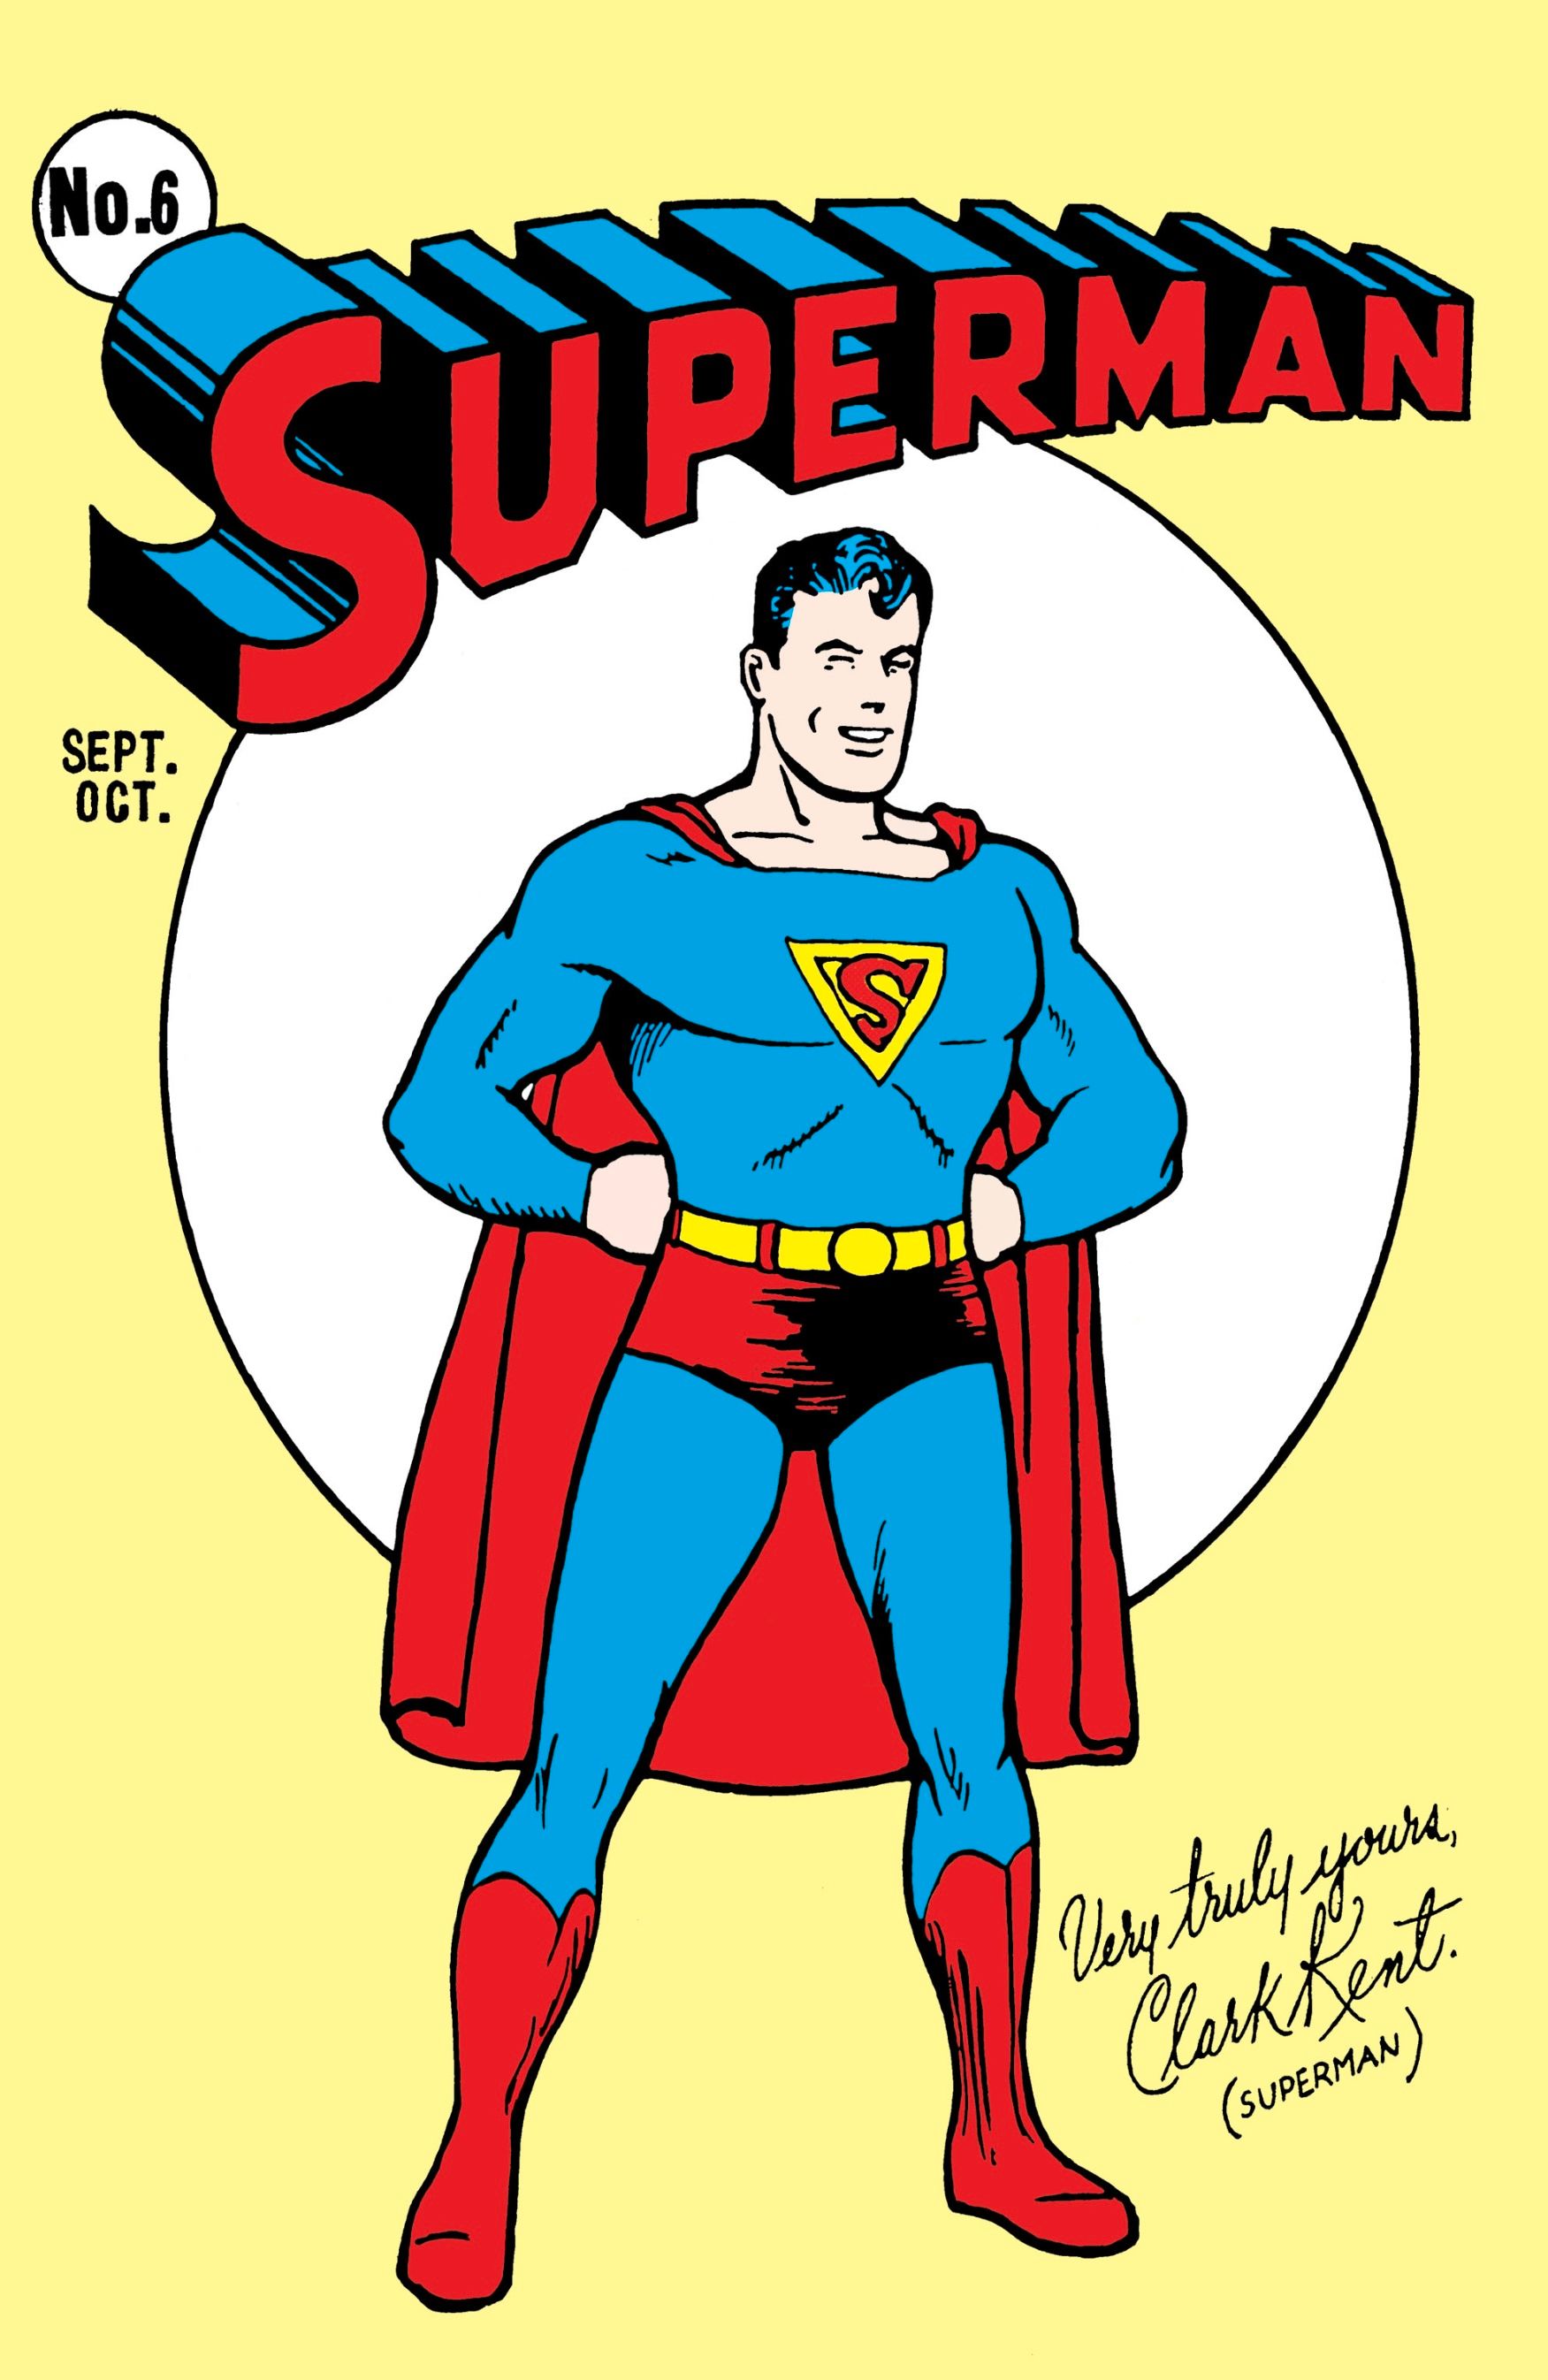 the cover of Superman #6. Superman standing with his hands on his hips infront of a white circle on a yellow background. At the bottom it looks like it is signed “Very Truly Yours, Clark Kent (Superman)”